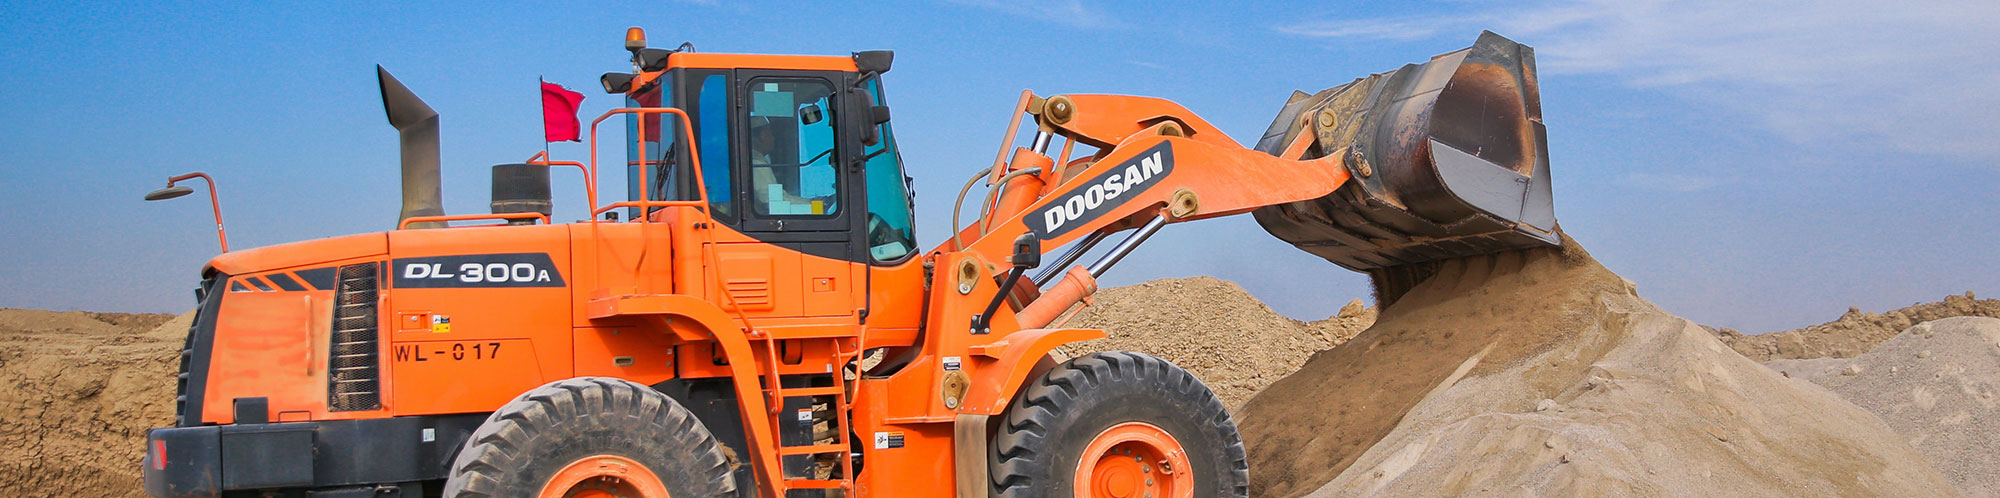 An image of an orange bulldozer in action